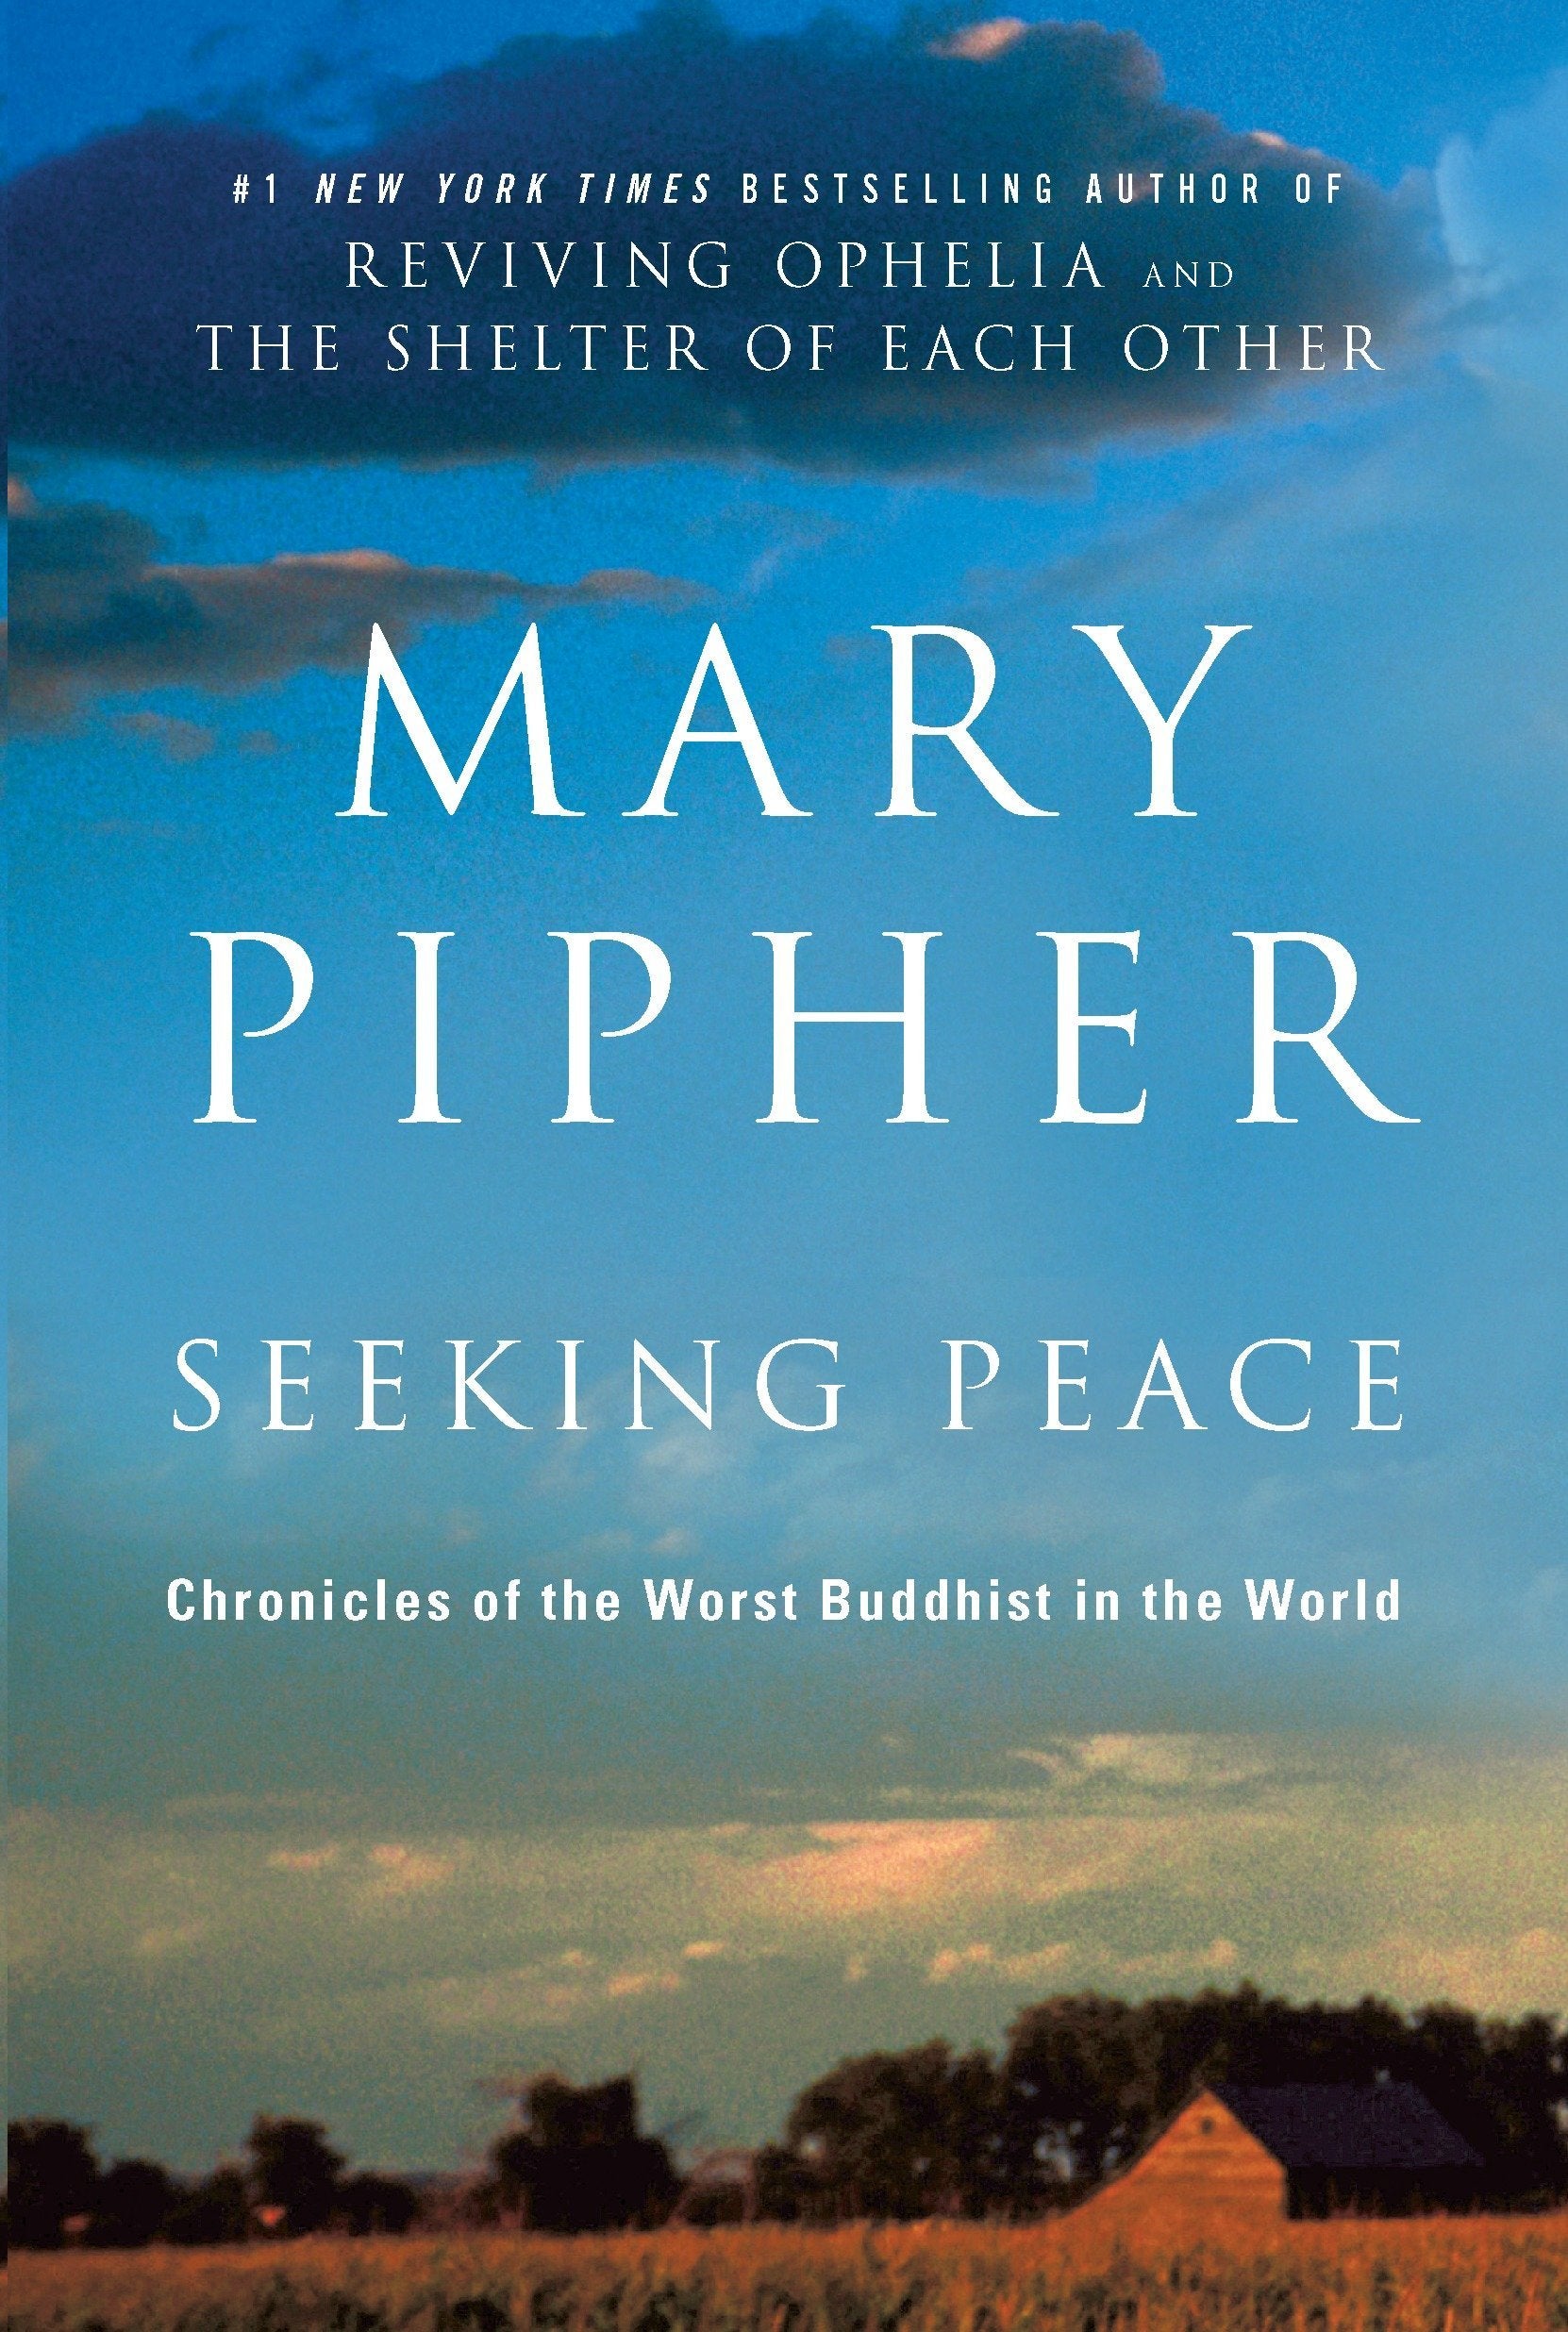 Seeking Peace: Chronicles of the Worst Buddhist in the World